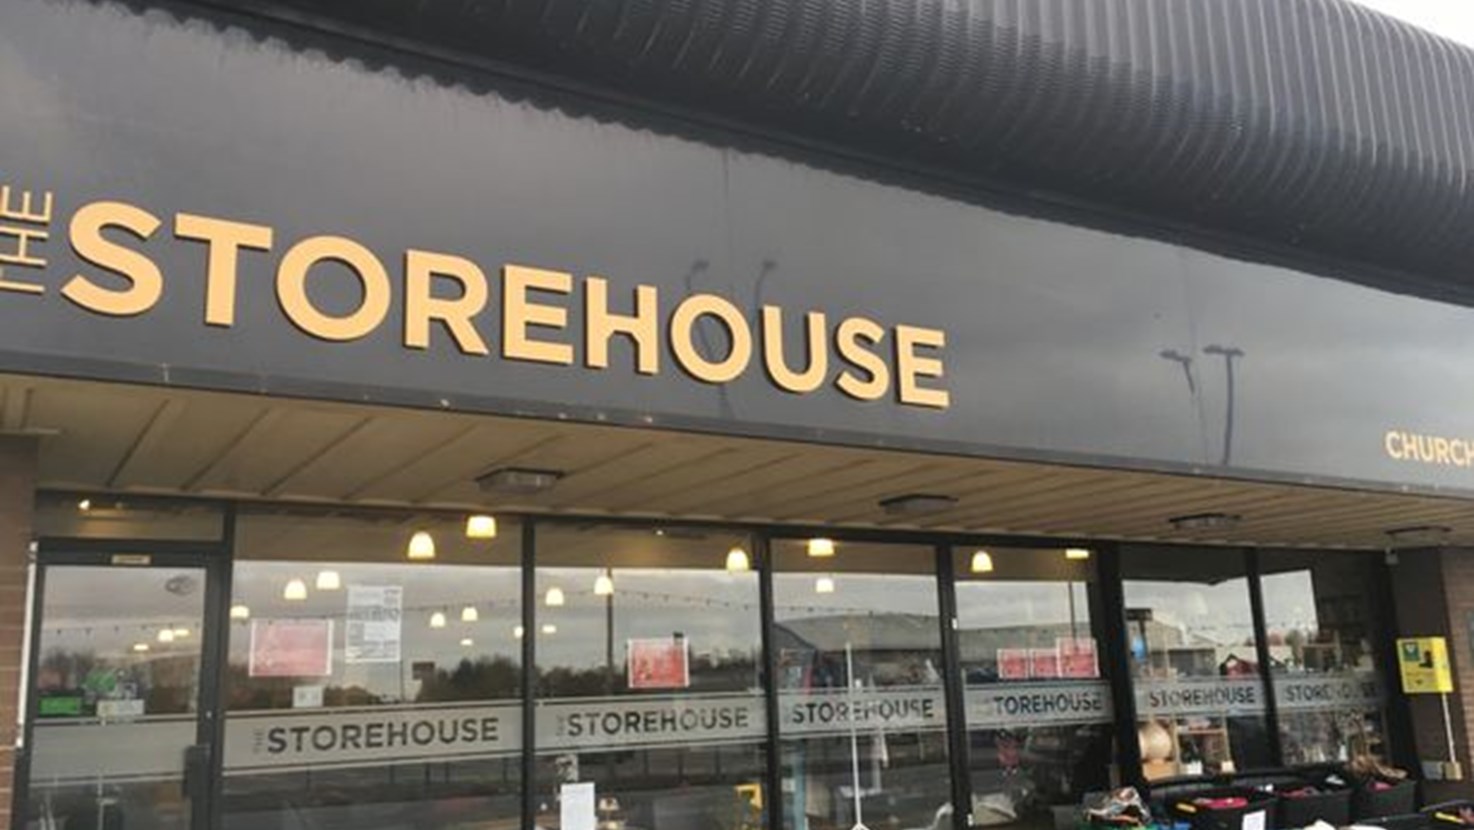 View all of the events and meetings that DPCC Phil Clark hosted or attended at The Storehouse in 2022